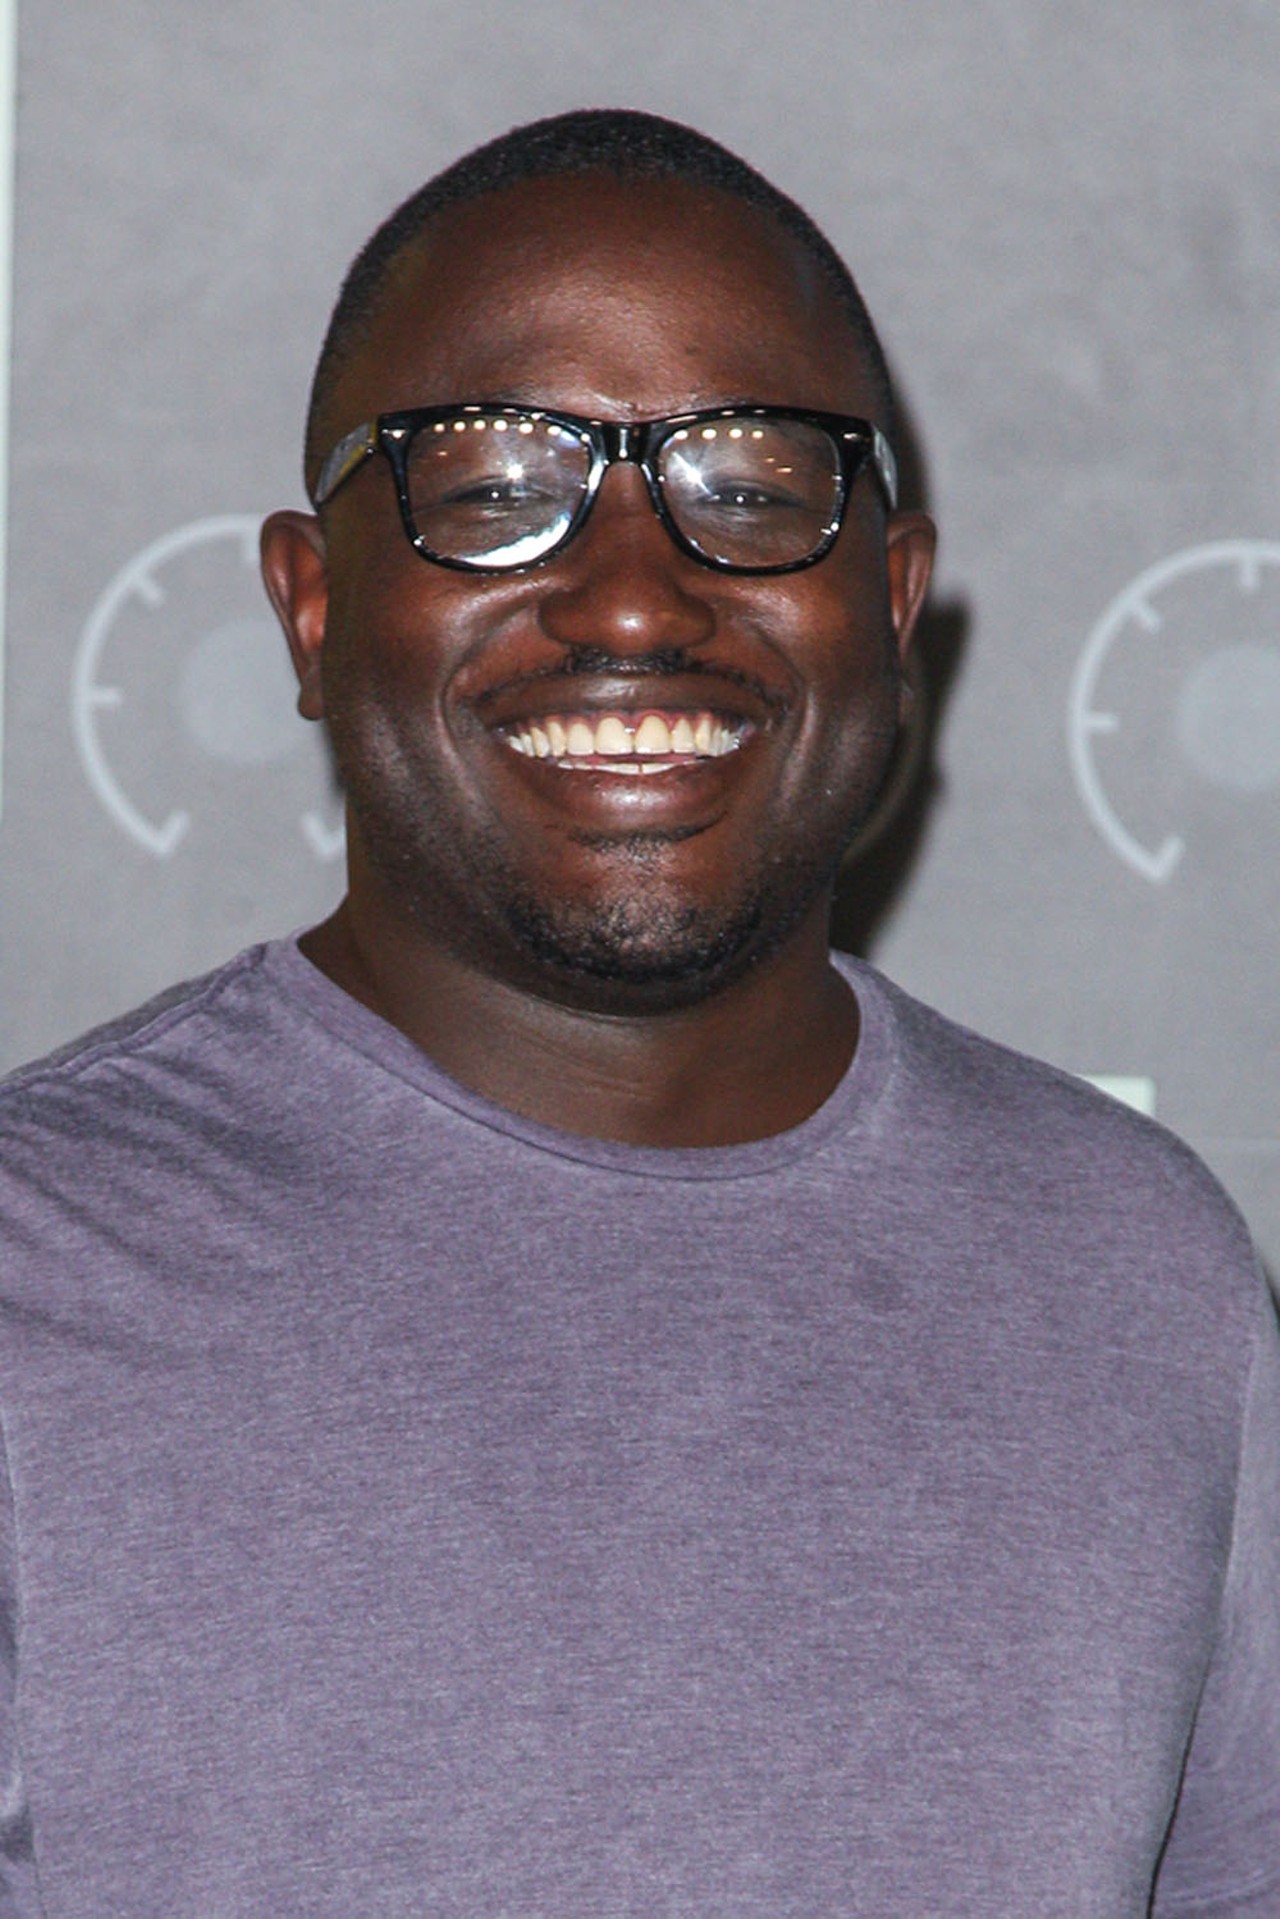 Saturday, 9/17 
Hannibal Buress
@ Masonic Temple 
You may recognize him as Alana&#146;s on-again-off-again boyfriend in Comedy Central&#146;s Broad City. He plays Lincoln, a New York dentist with a penchant for fixing Alana&#146;s dubious mistakes. Buress is bringing his comedic excellence to the Masonic Temple and hopefully will be bringing some of his controversial (but funny as hell) jokes to the stage. 
Starts at 7 p.m.; 500 Temple St., Detroit; the masonic.com; Tickets are $35.